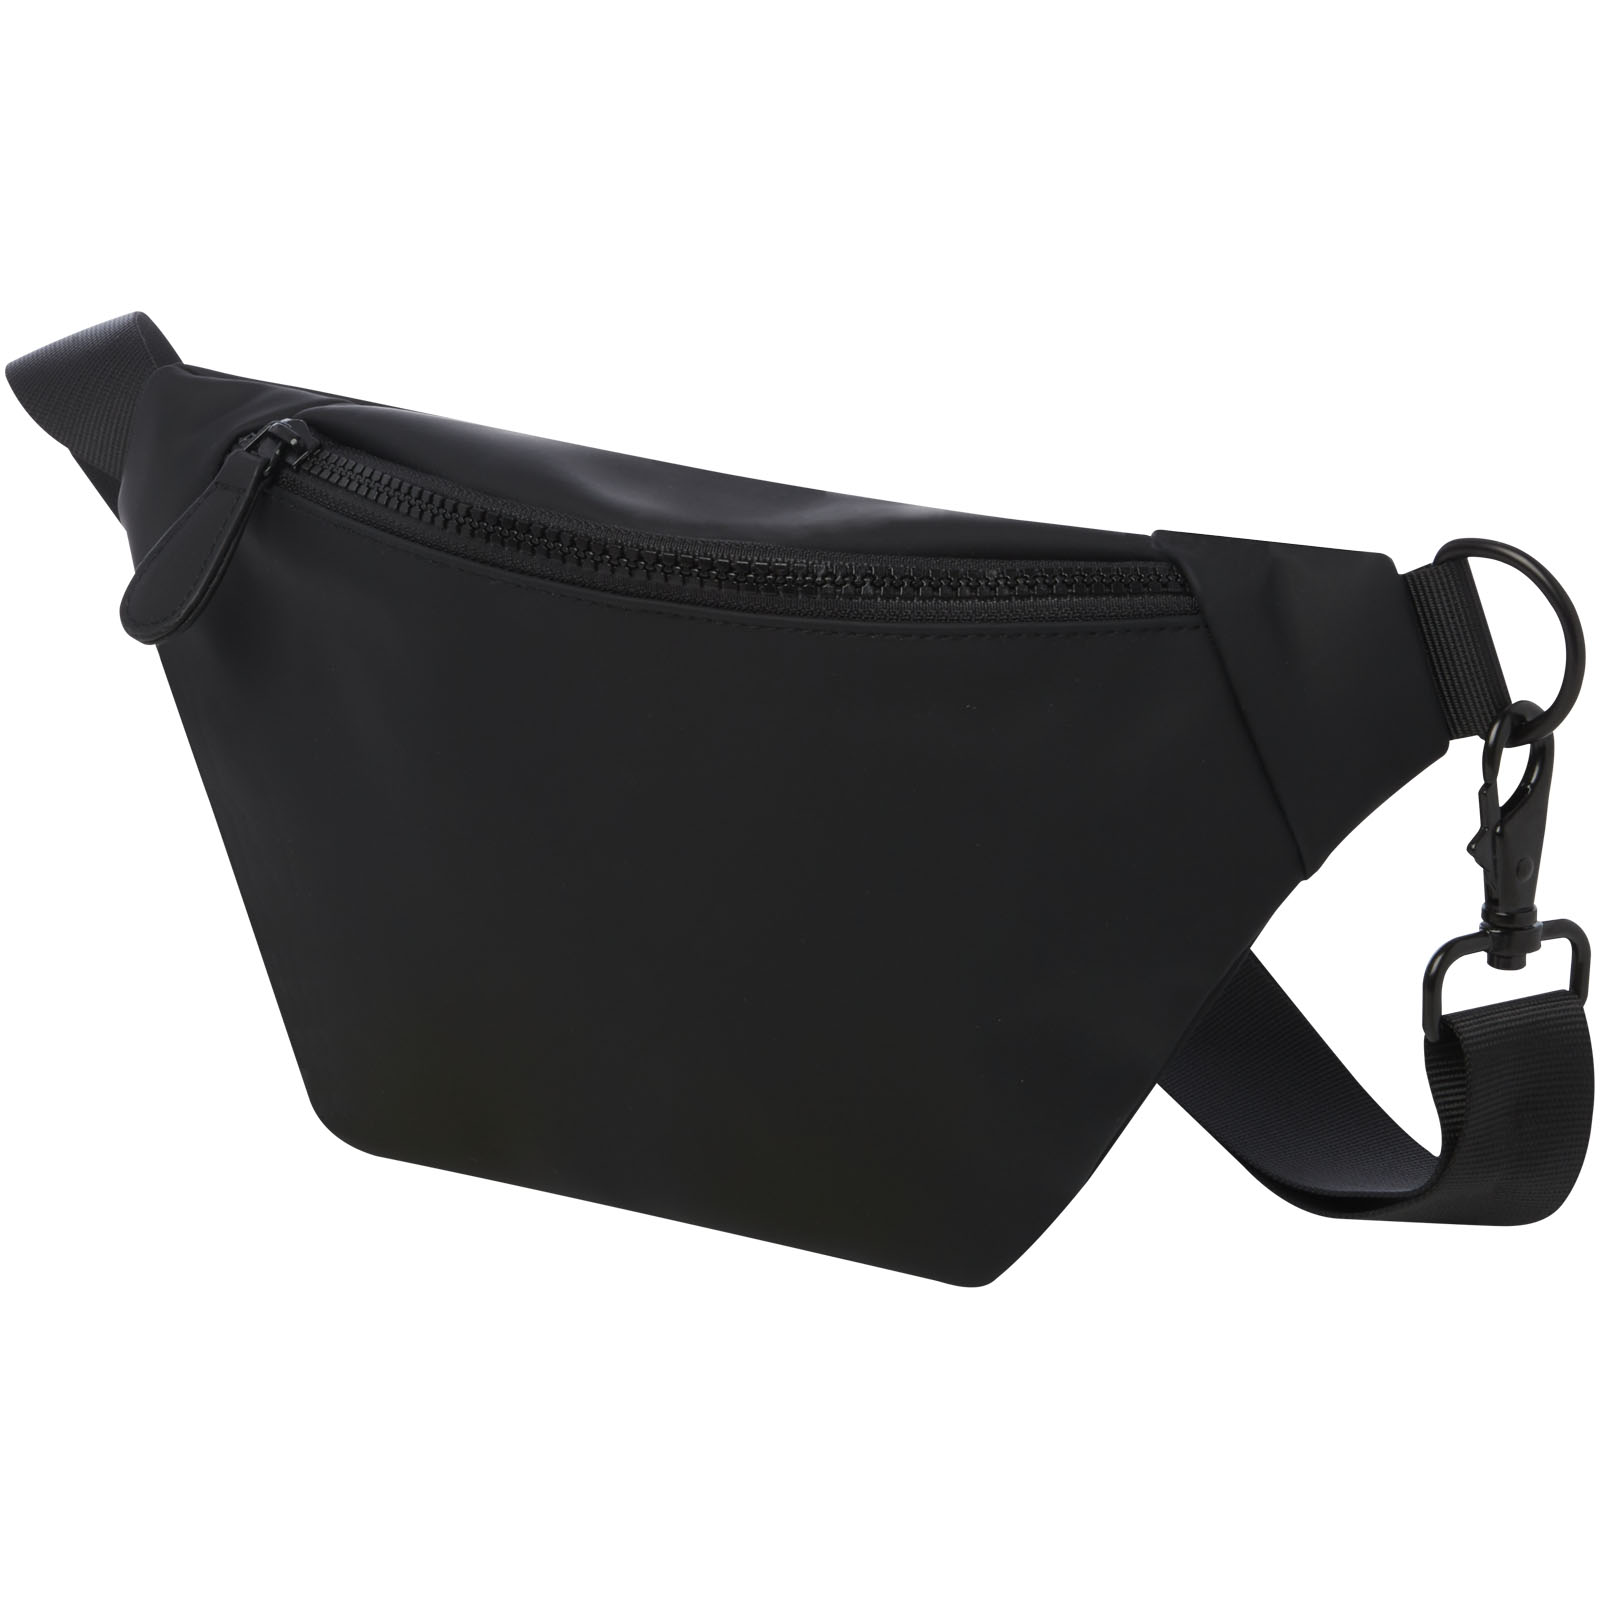 Advertising Travel Accessories - Turner fanny pack